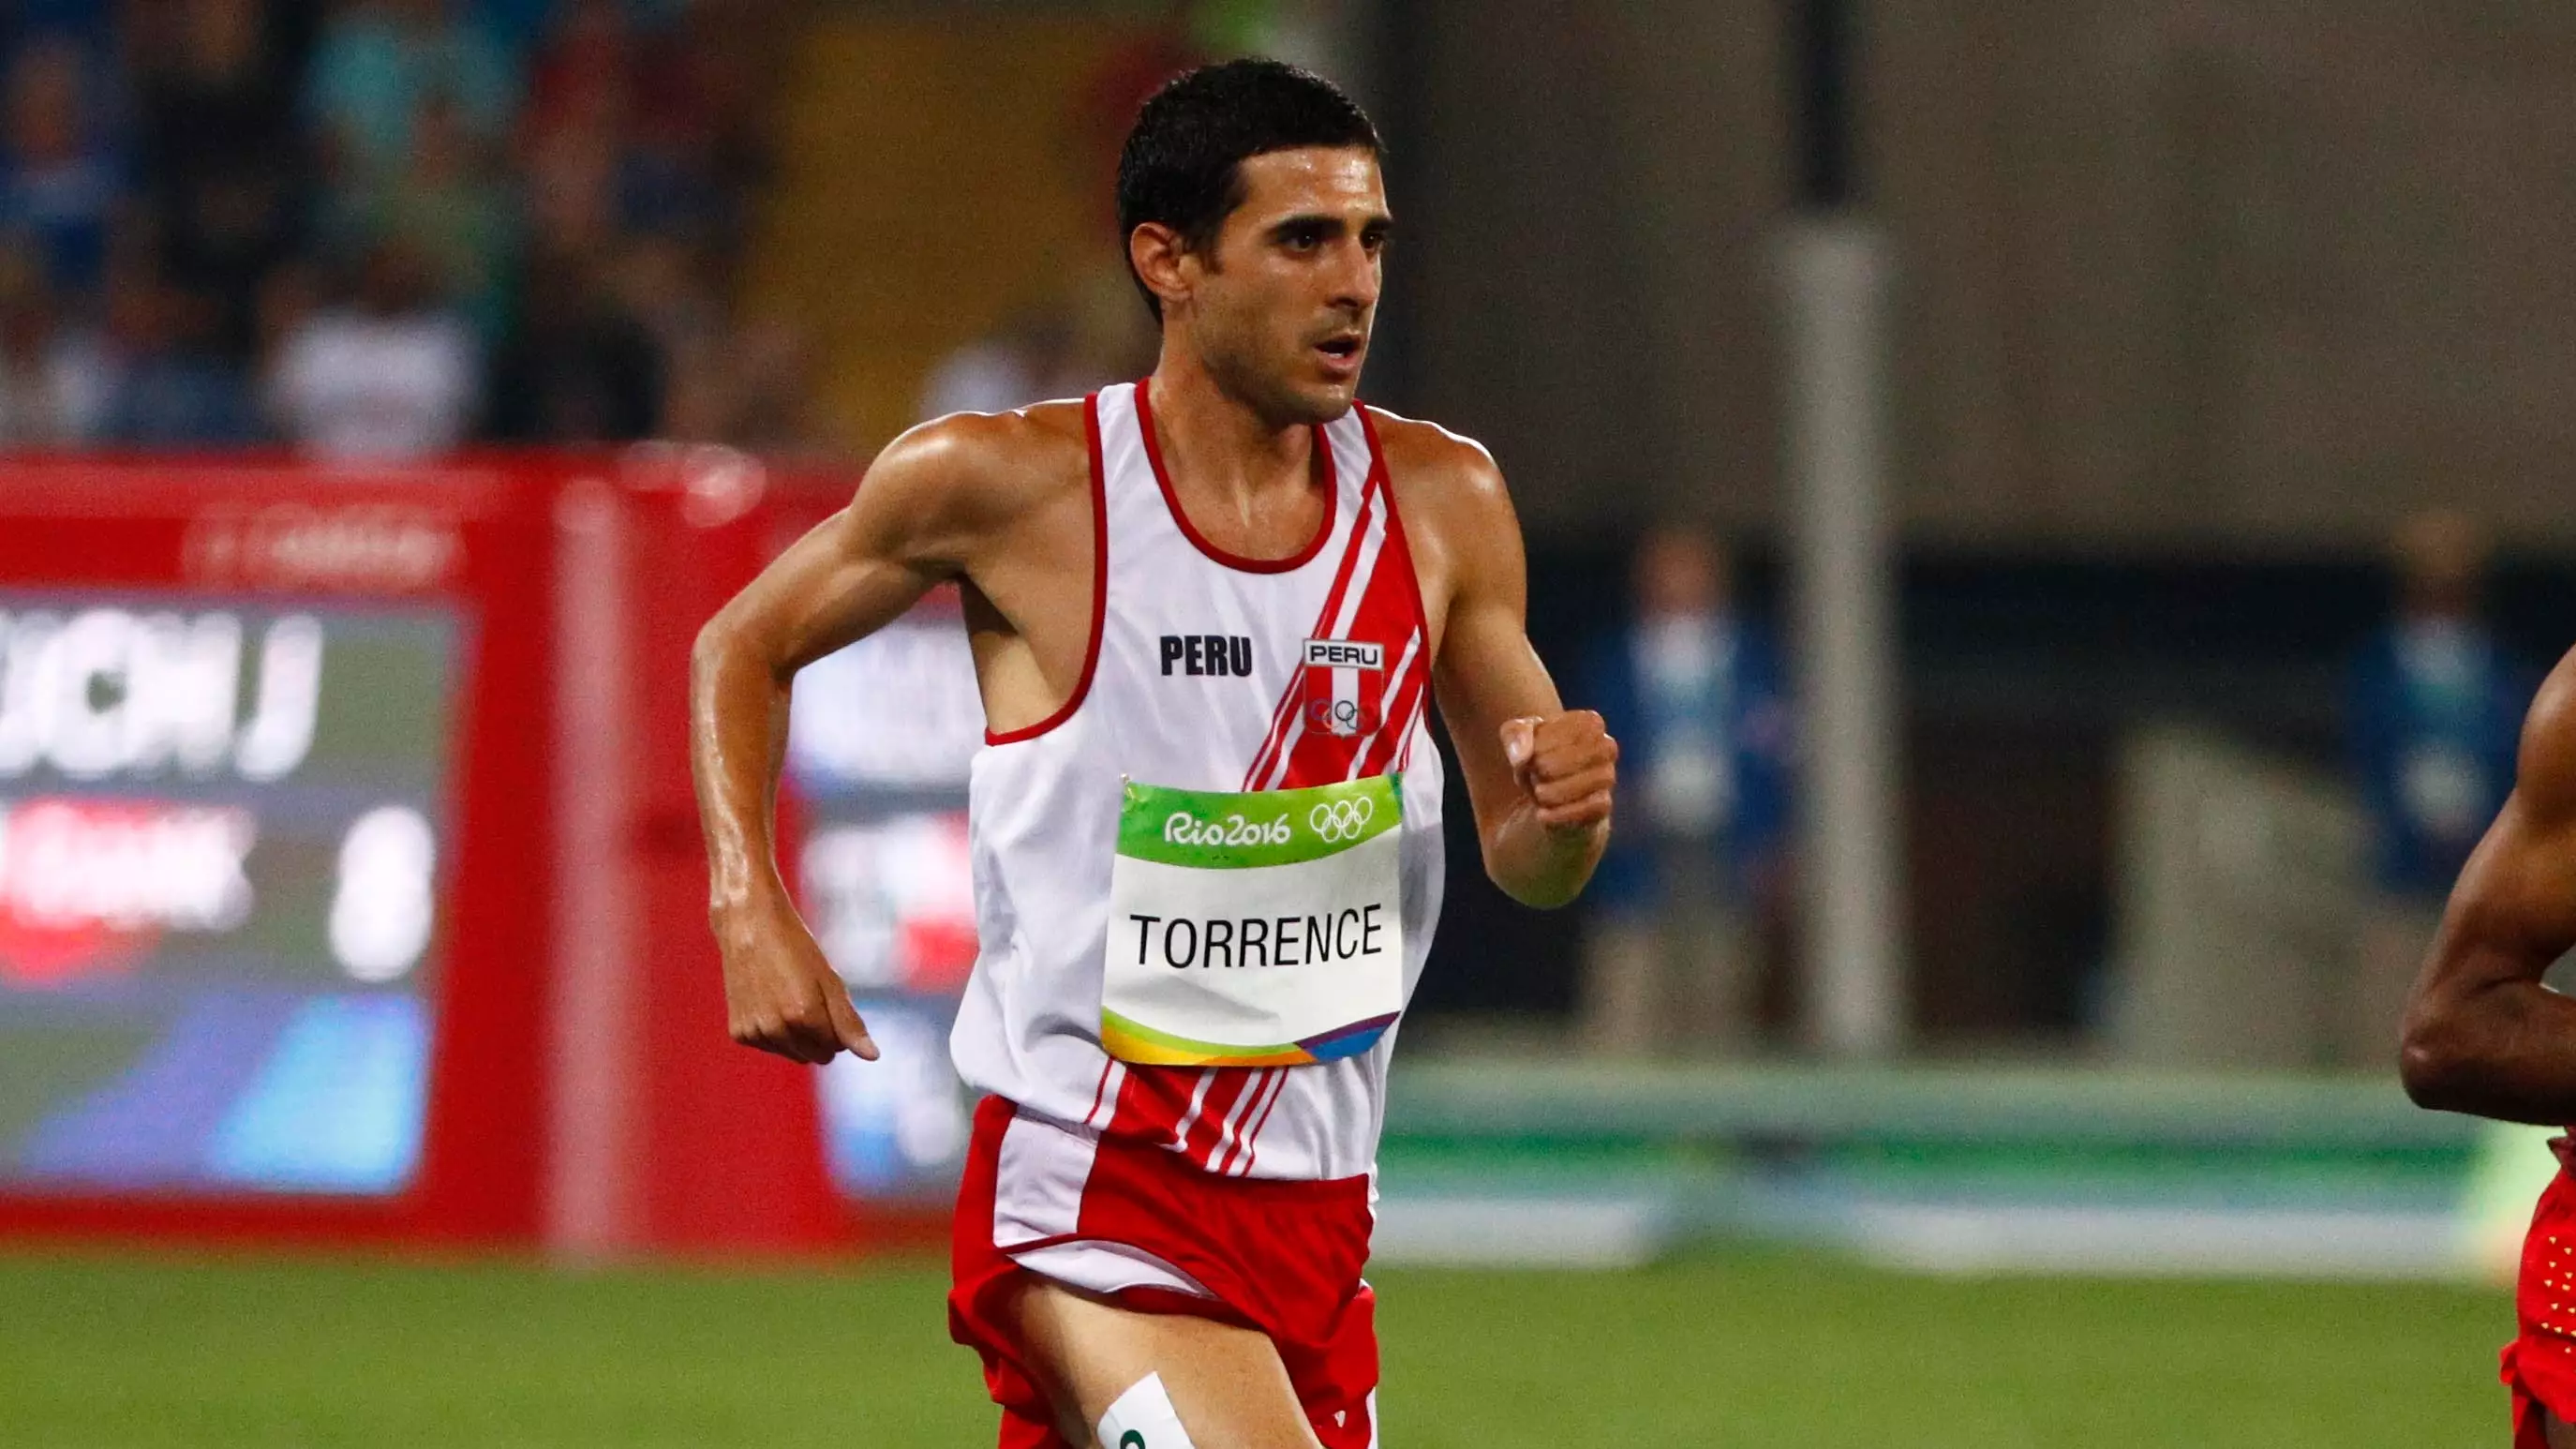 Olympic Runner David Torrence Found Dead At Bottom Of Swimming Pool